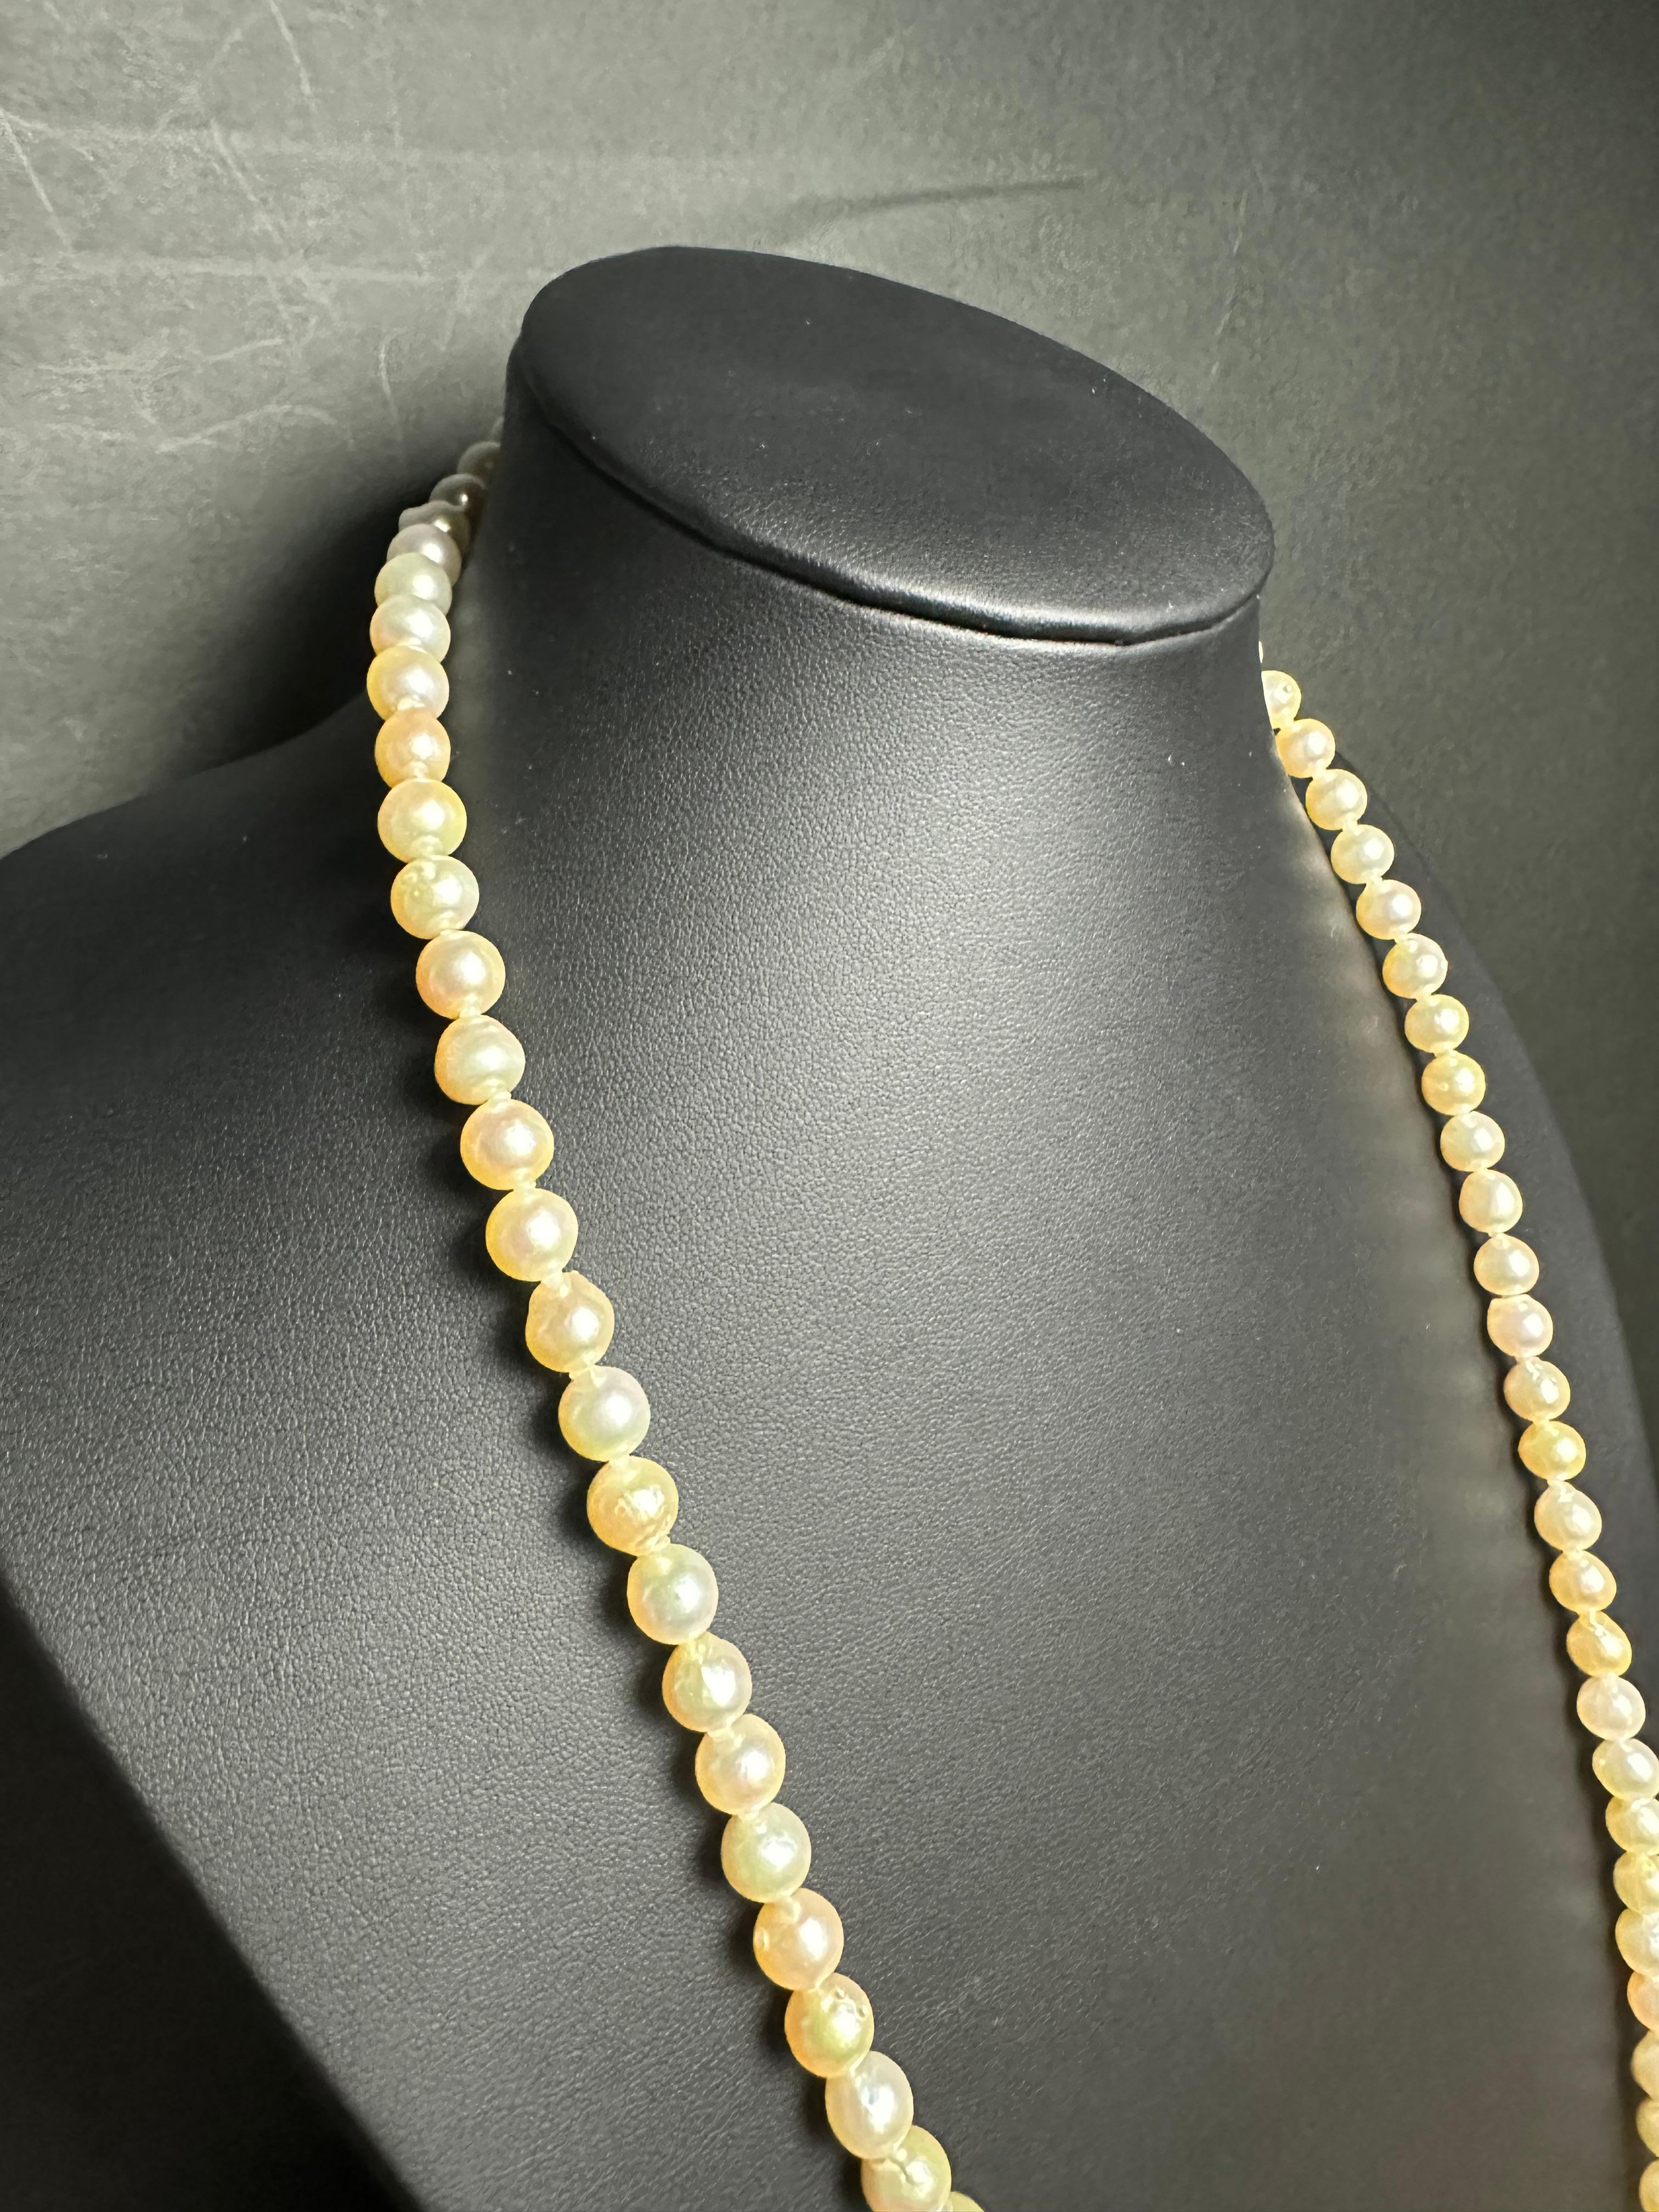 Artisan IRIS PARURE Beni Akoya 8.5mm×94 Pearl Necklace, Non Colored & Non Bleached Pearl For Sale